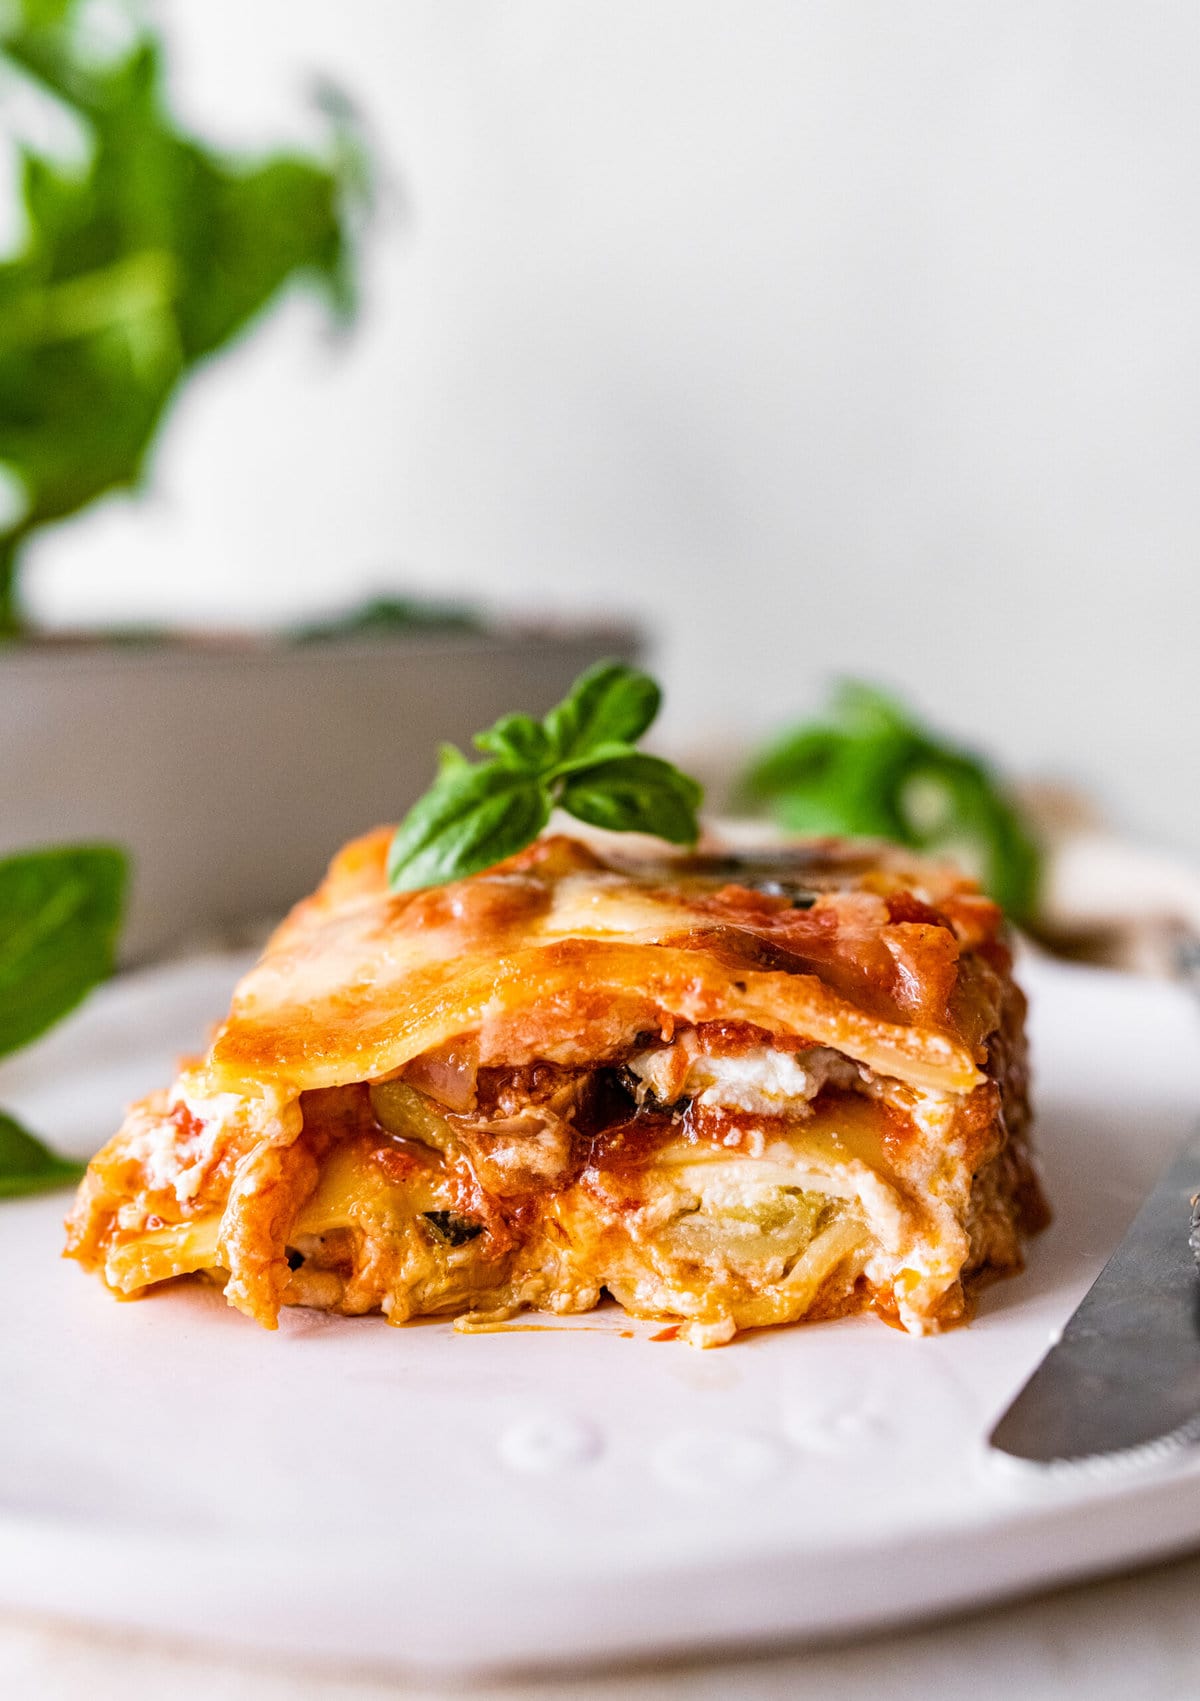 Easy Mediterranean Lasagna slice on a plate ready to eat. Fork and knife on the plate.